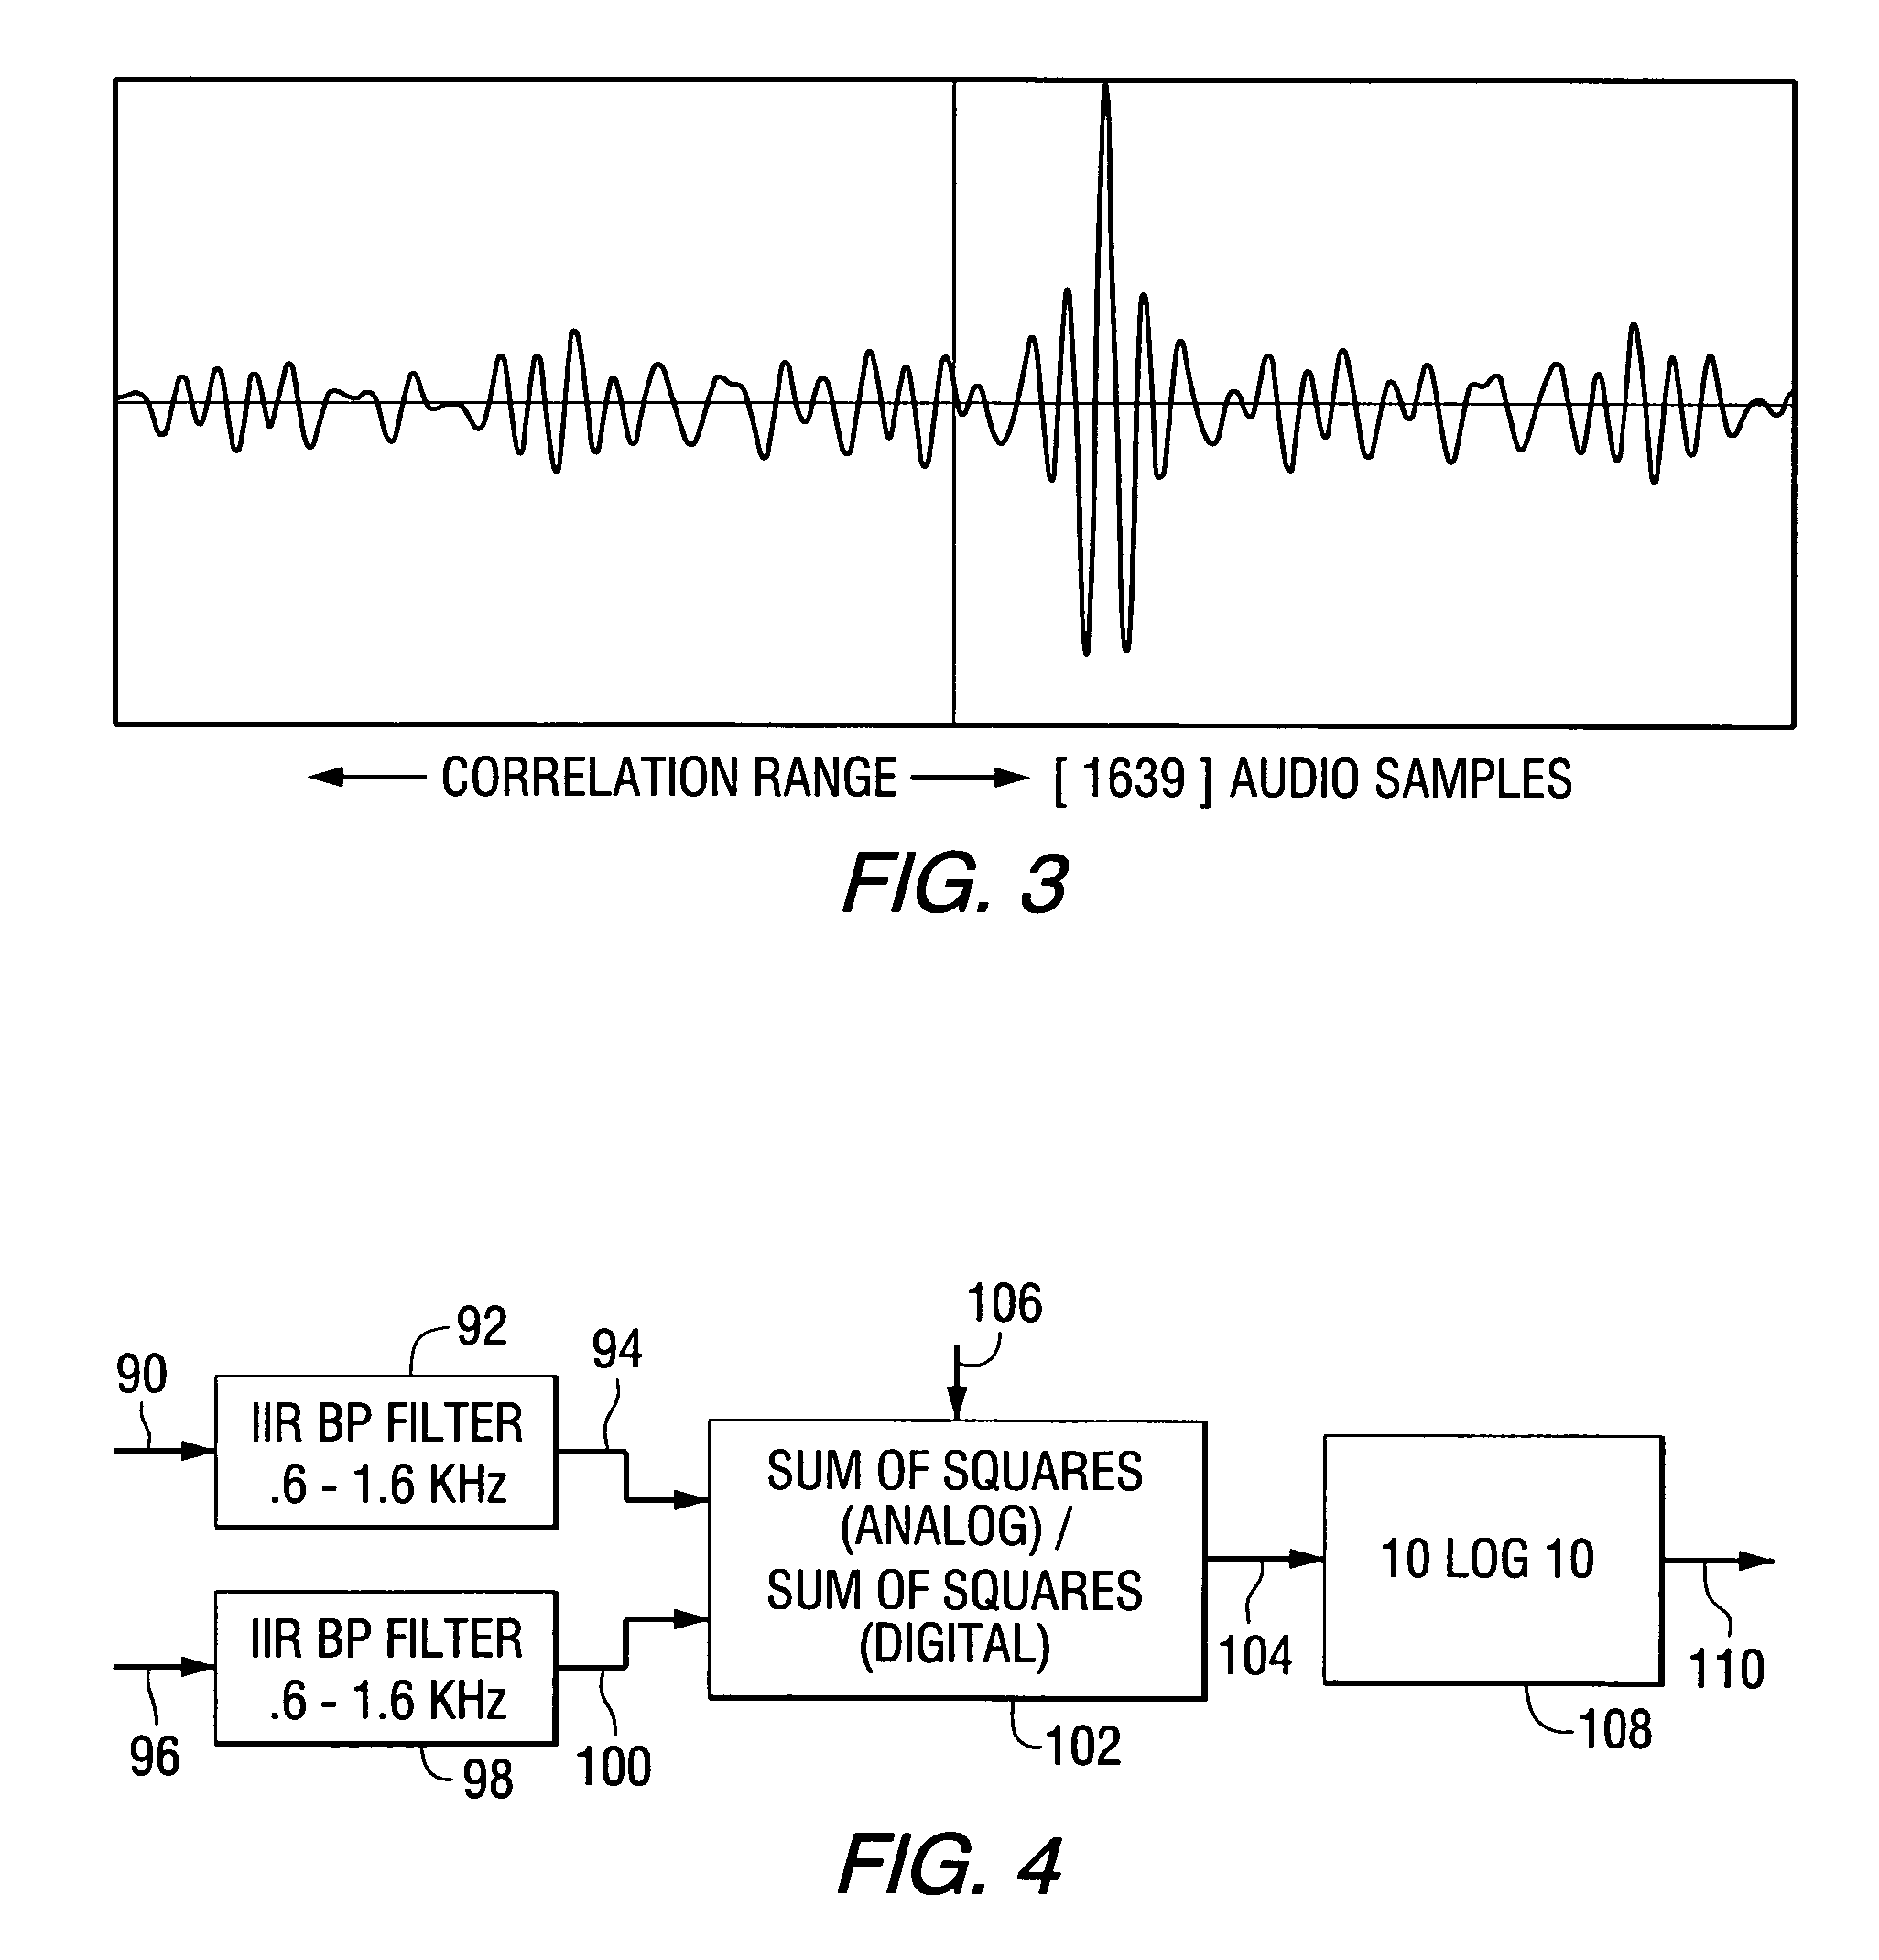 Method for alignment of analog and digital audio in a hybrid radio waveform